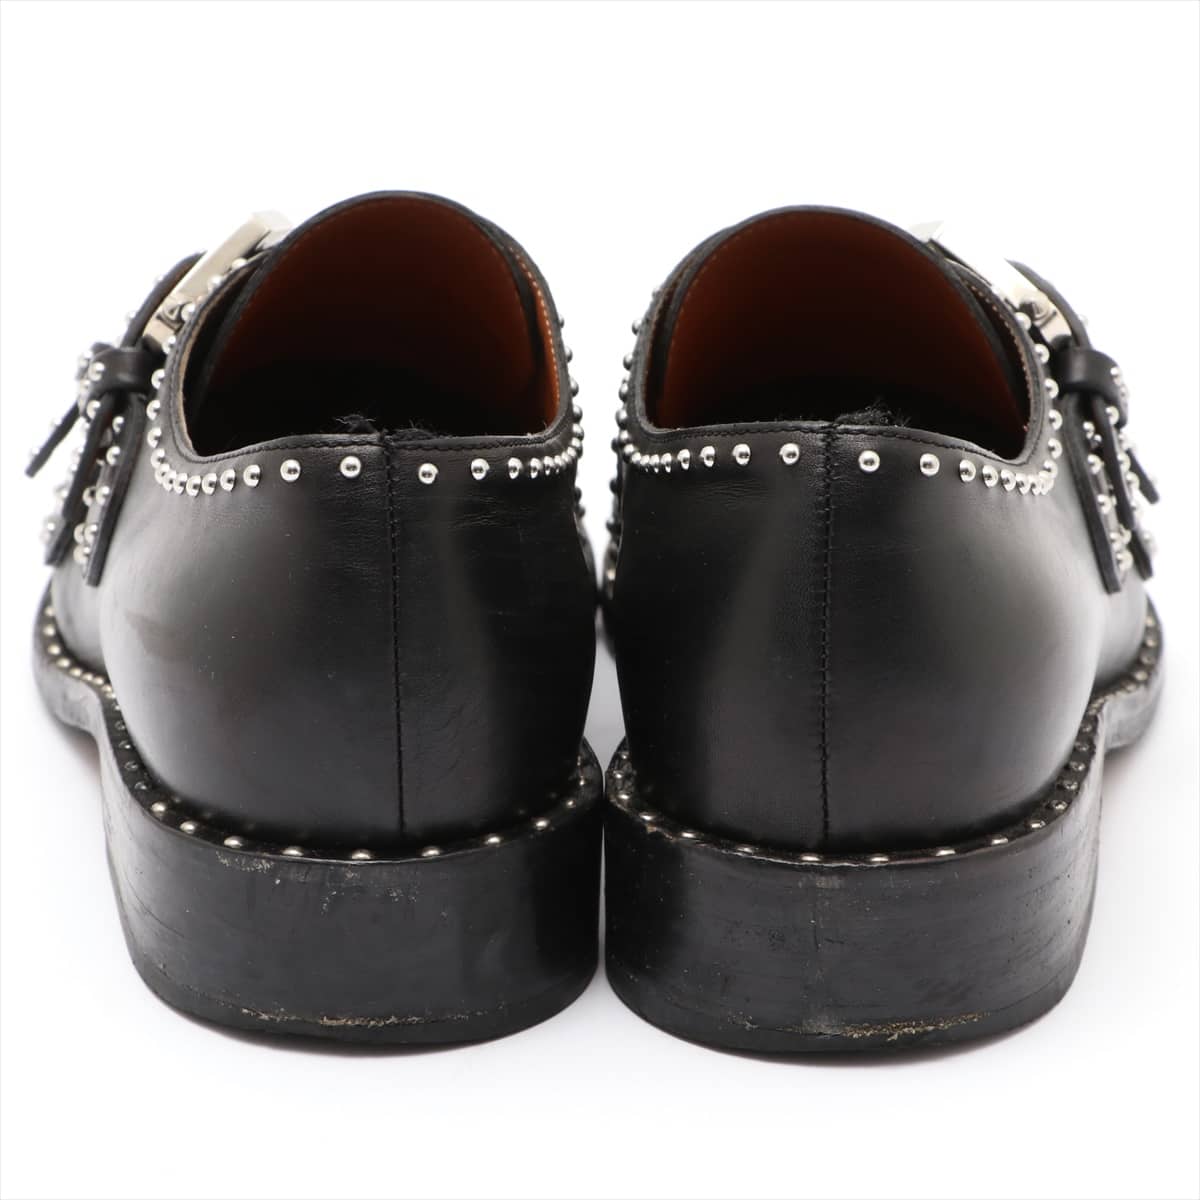 Givenchy Leather Shoes 38 Ladies' Black Studs